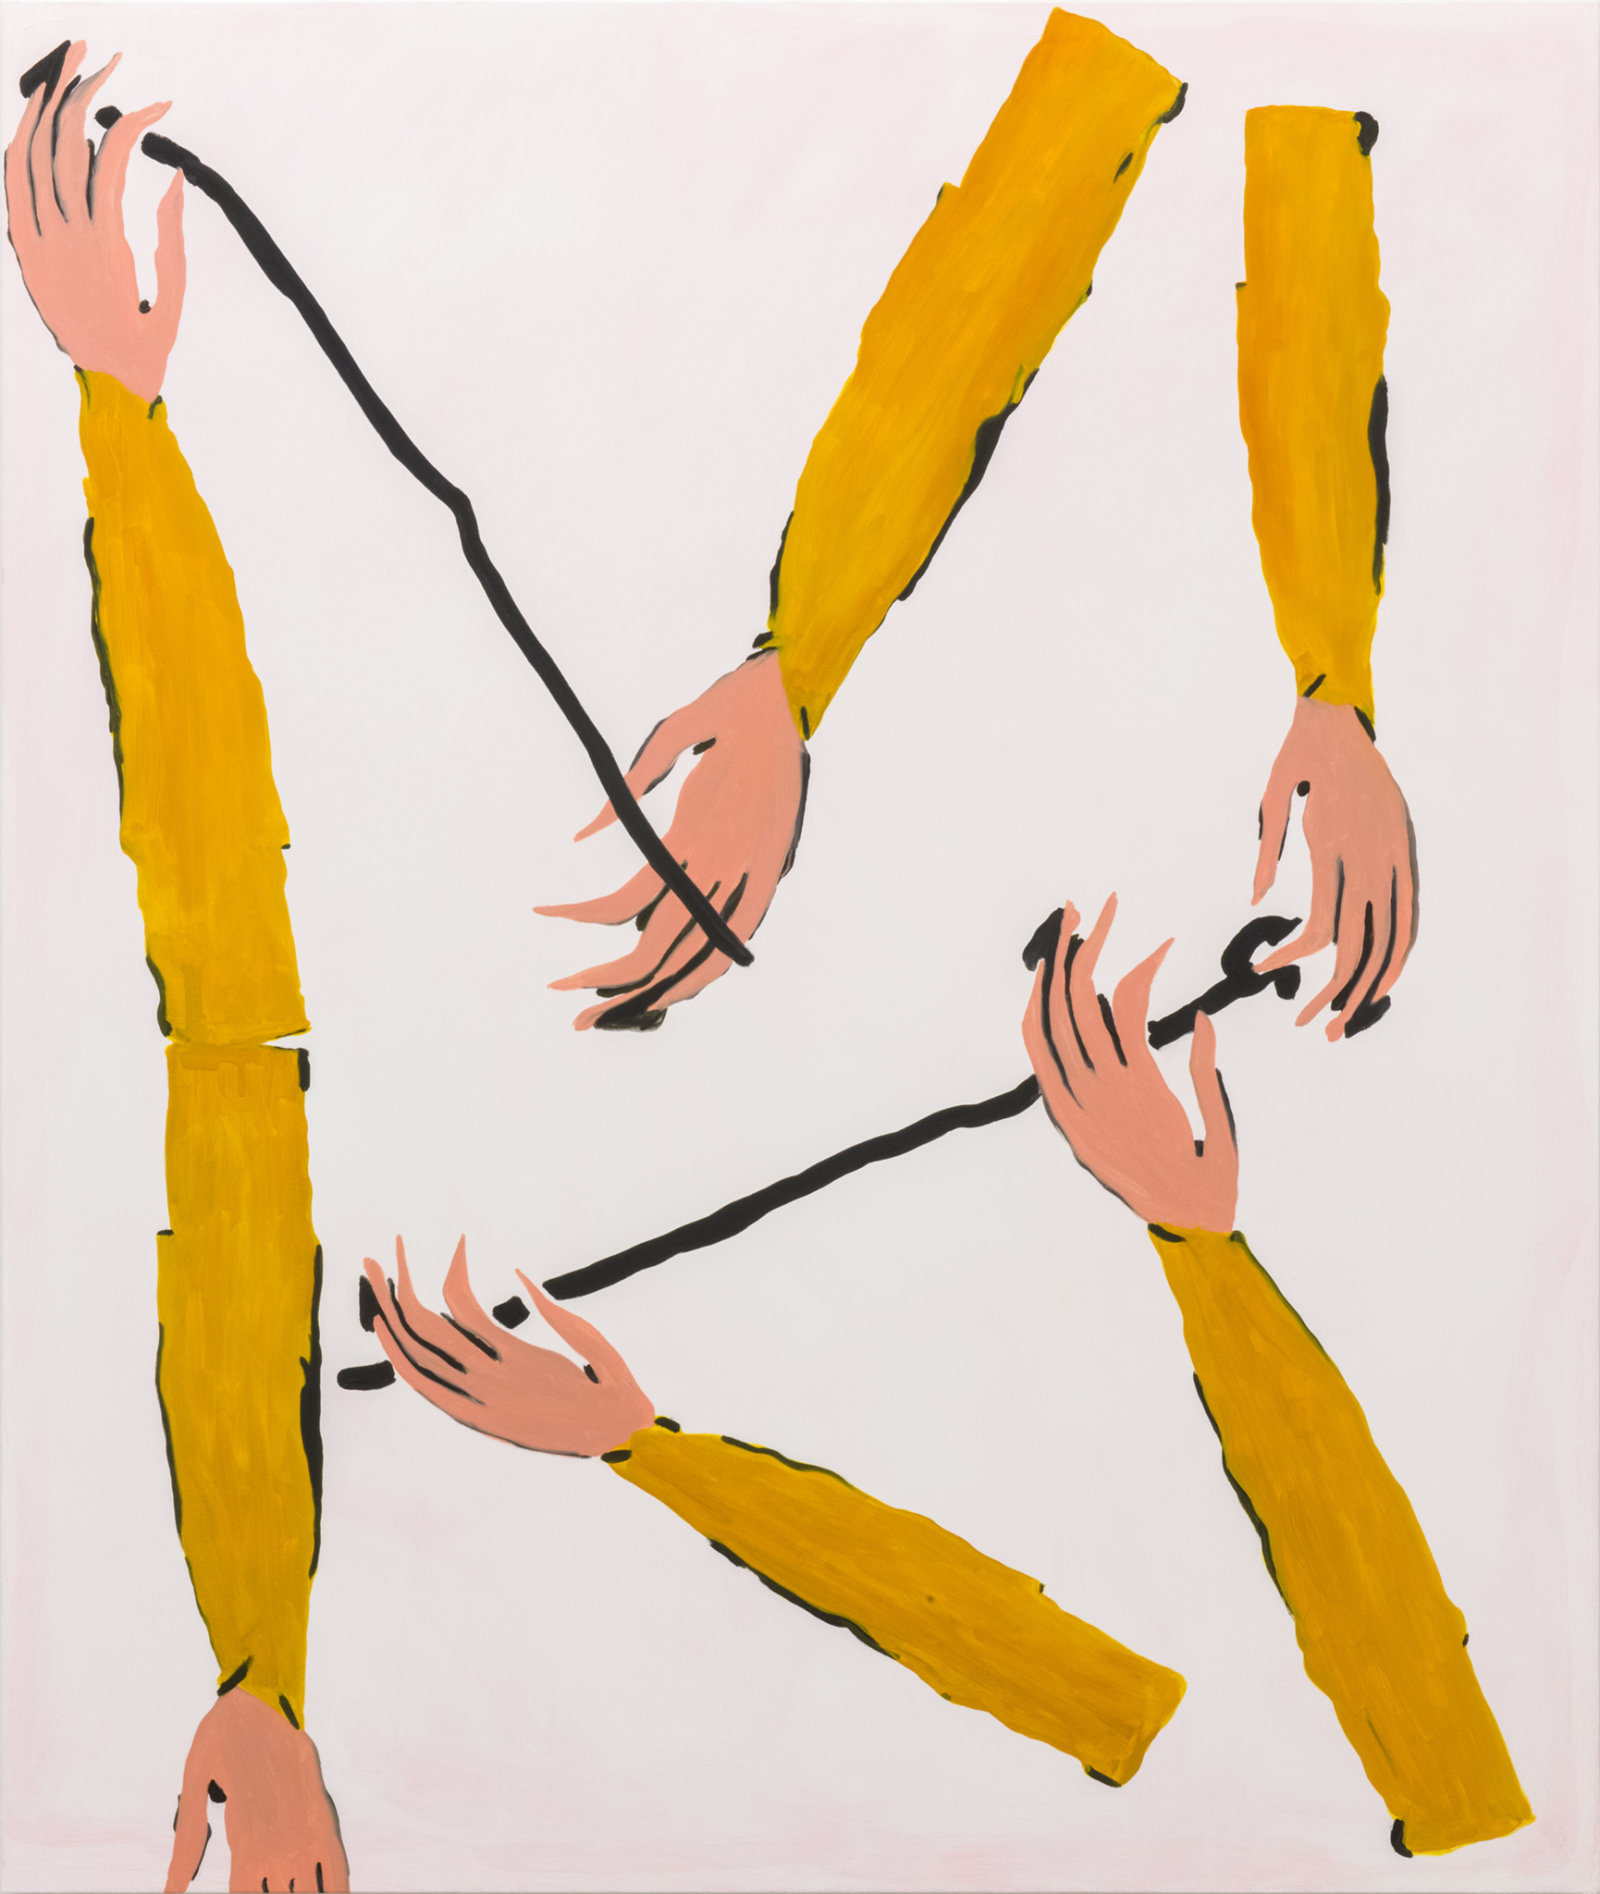 Elizabeth McIntosh, Hands Arms, 2016, flashe and oil on canvas, 69 x 58 in. (173 x 147 cm)